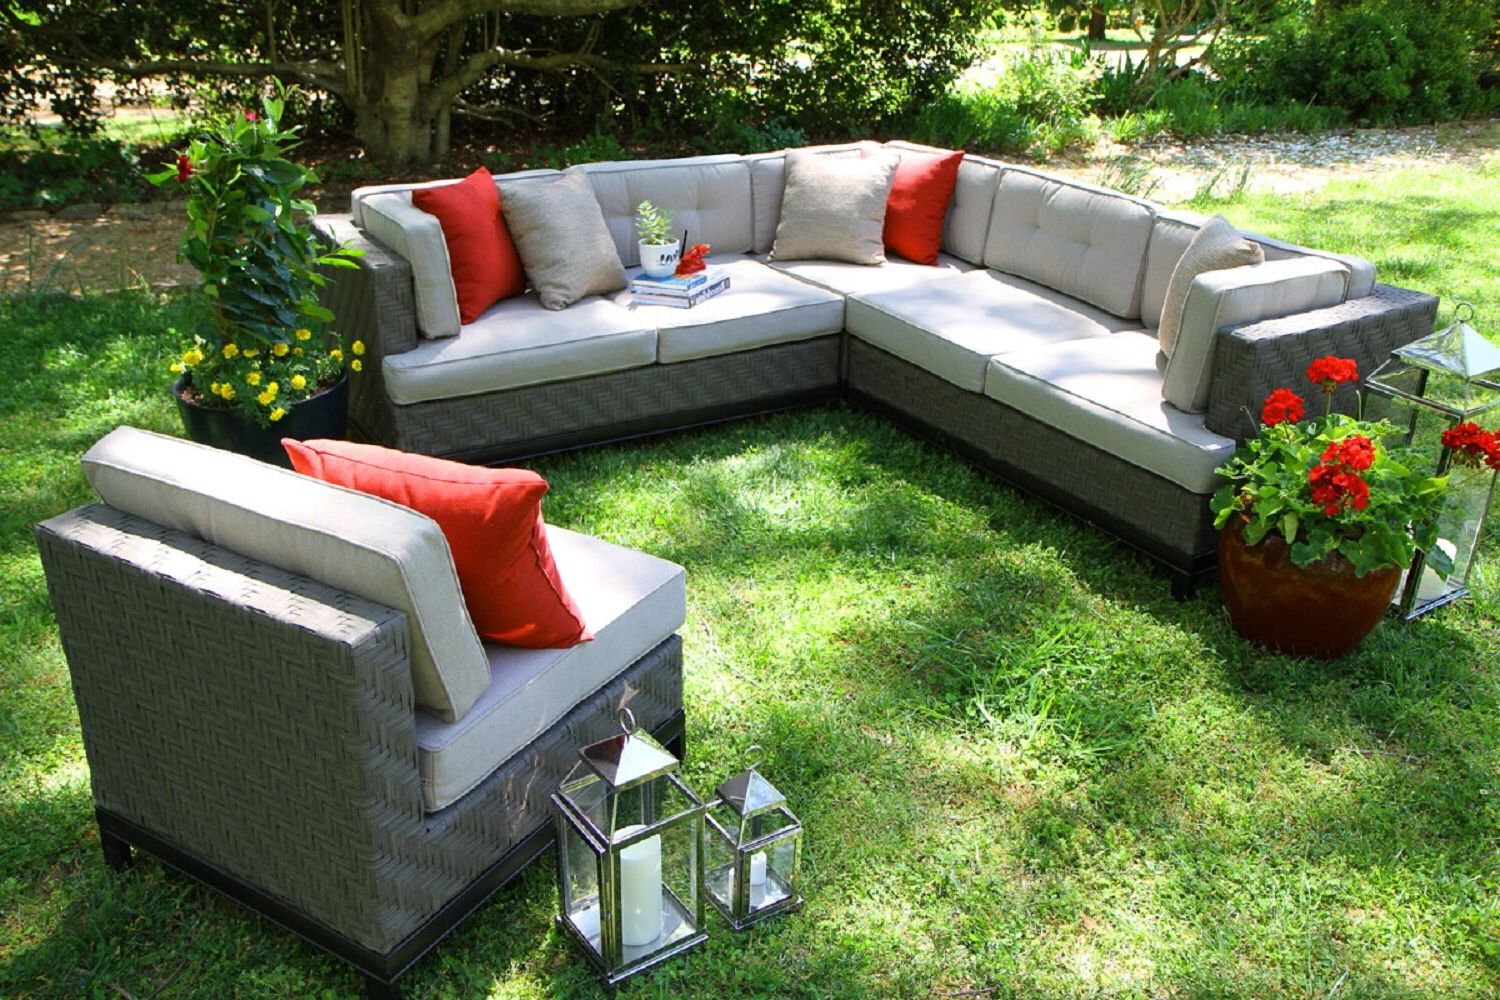 Popular Jamarion 4 Piece Sectionals With Sunbrella Cushions Intended For Jamarion 4 Piece Sectional With Sunbrella Cushions (View 1 of 20)